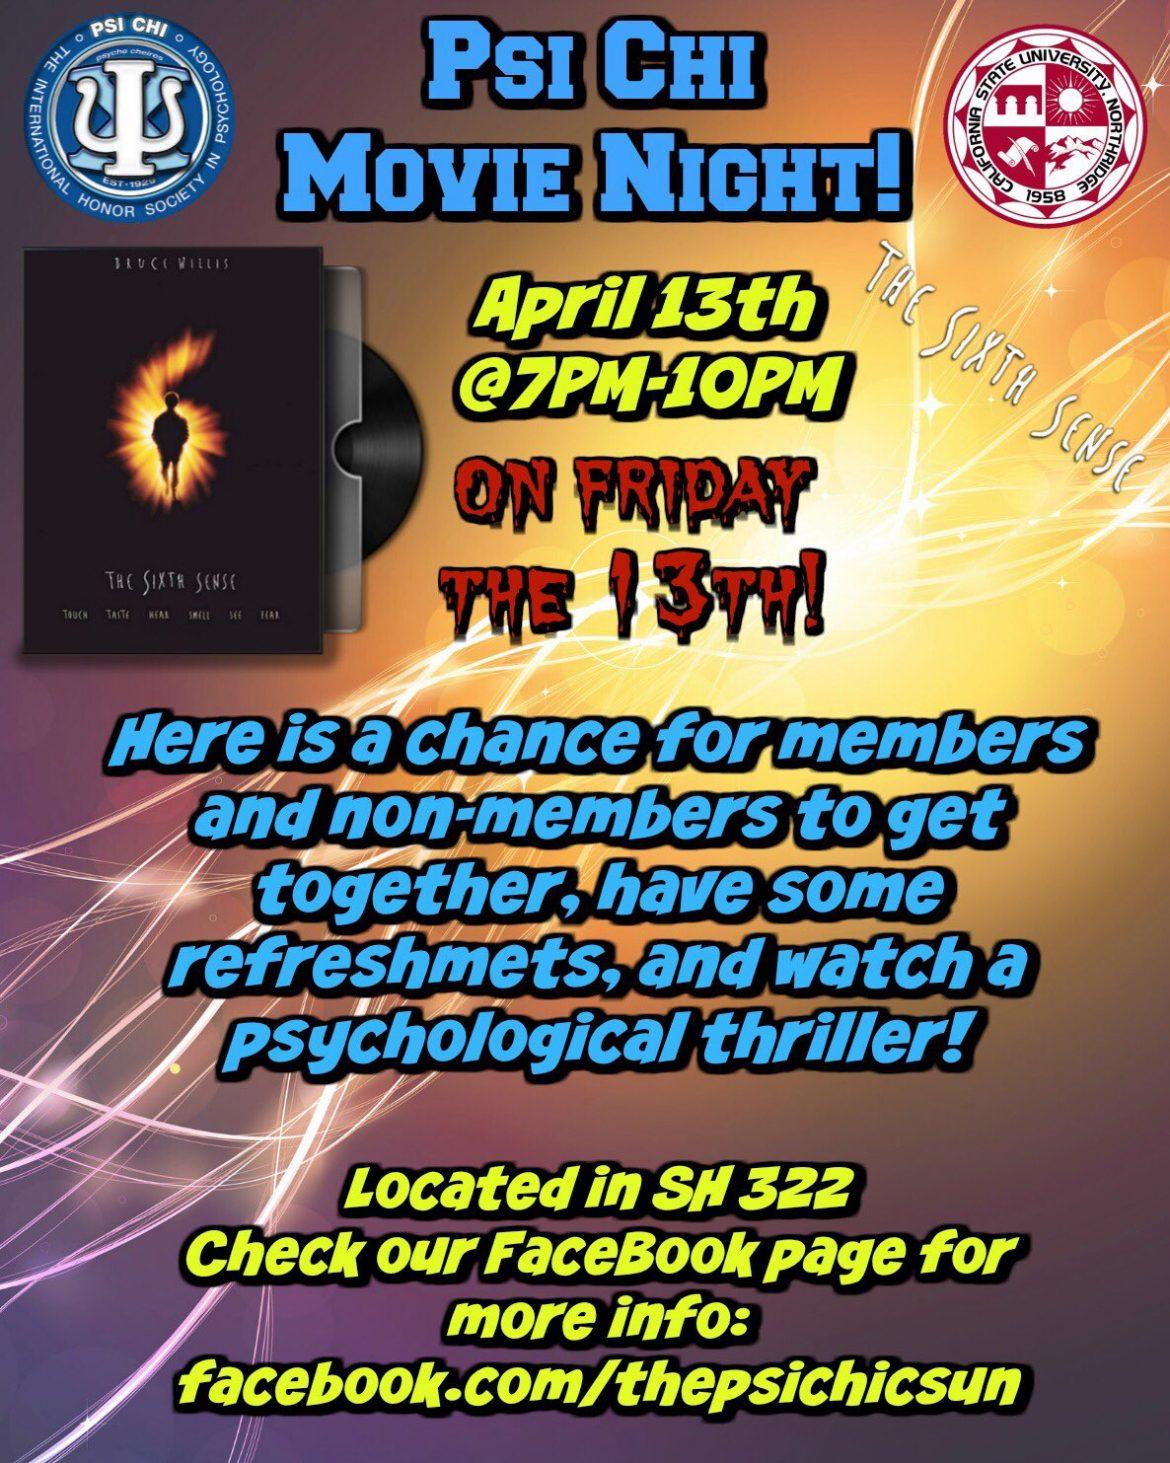 colorful flyer for a movie night